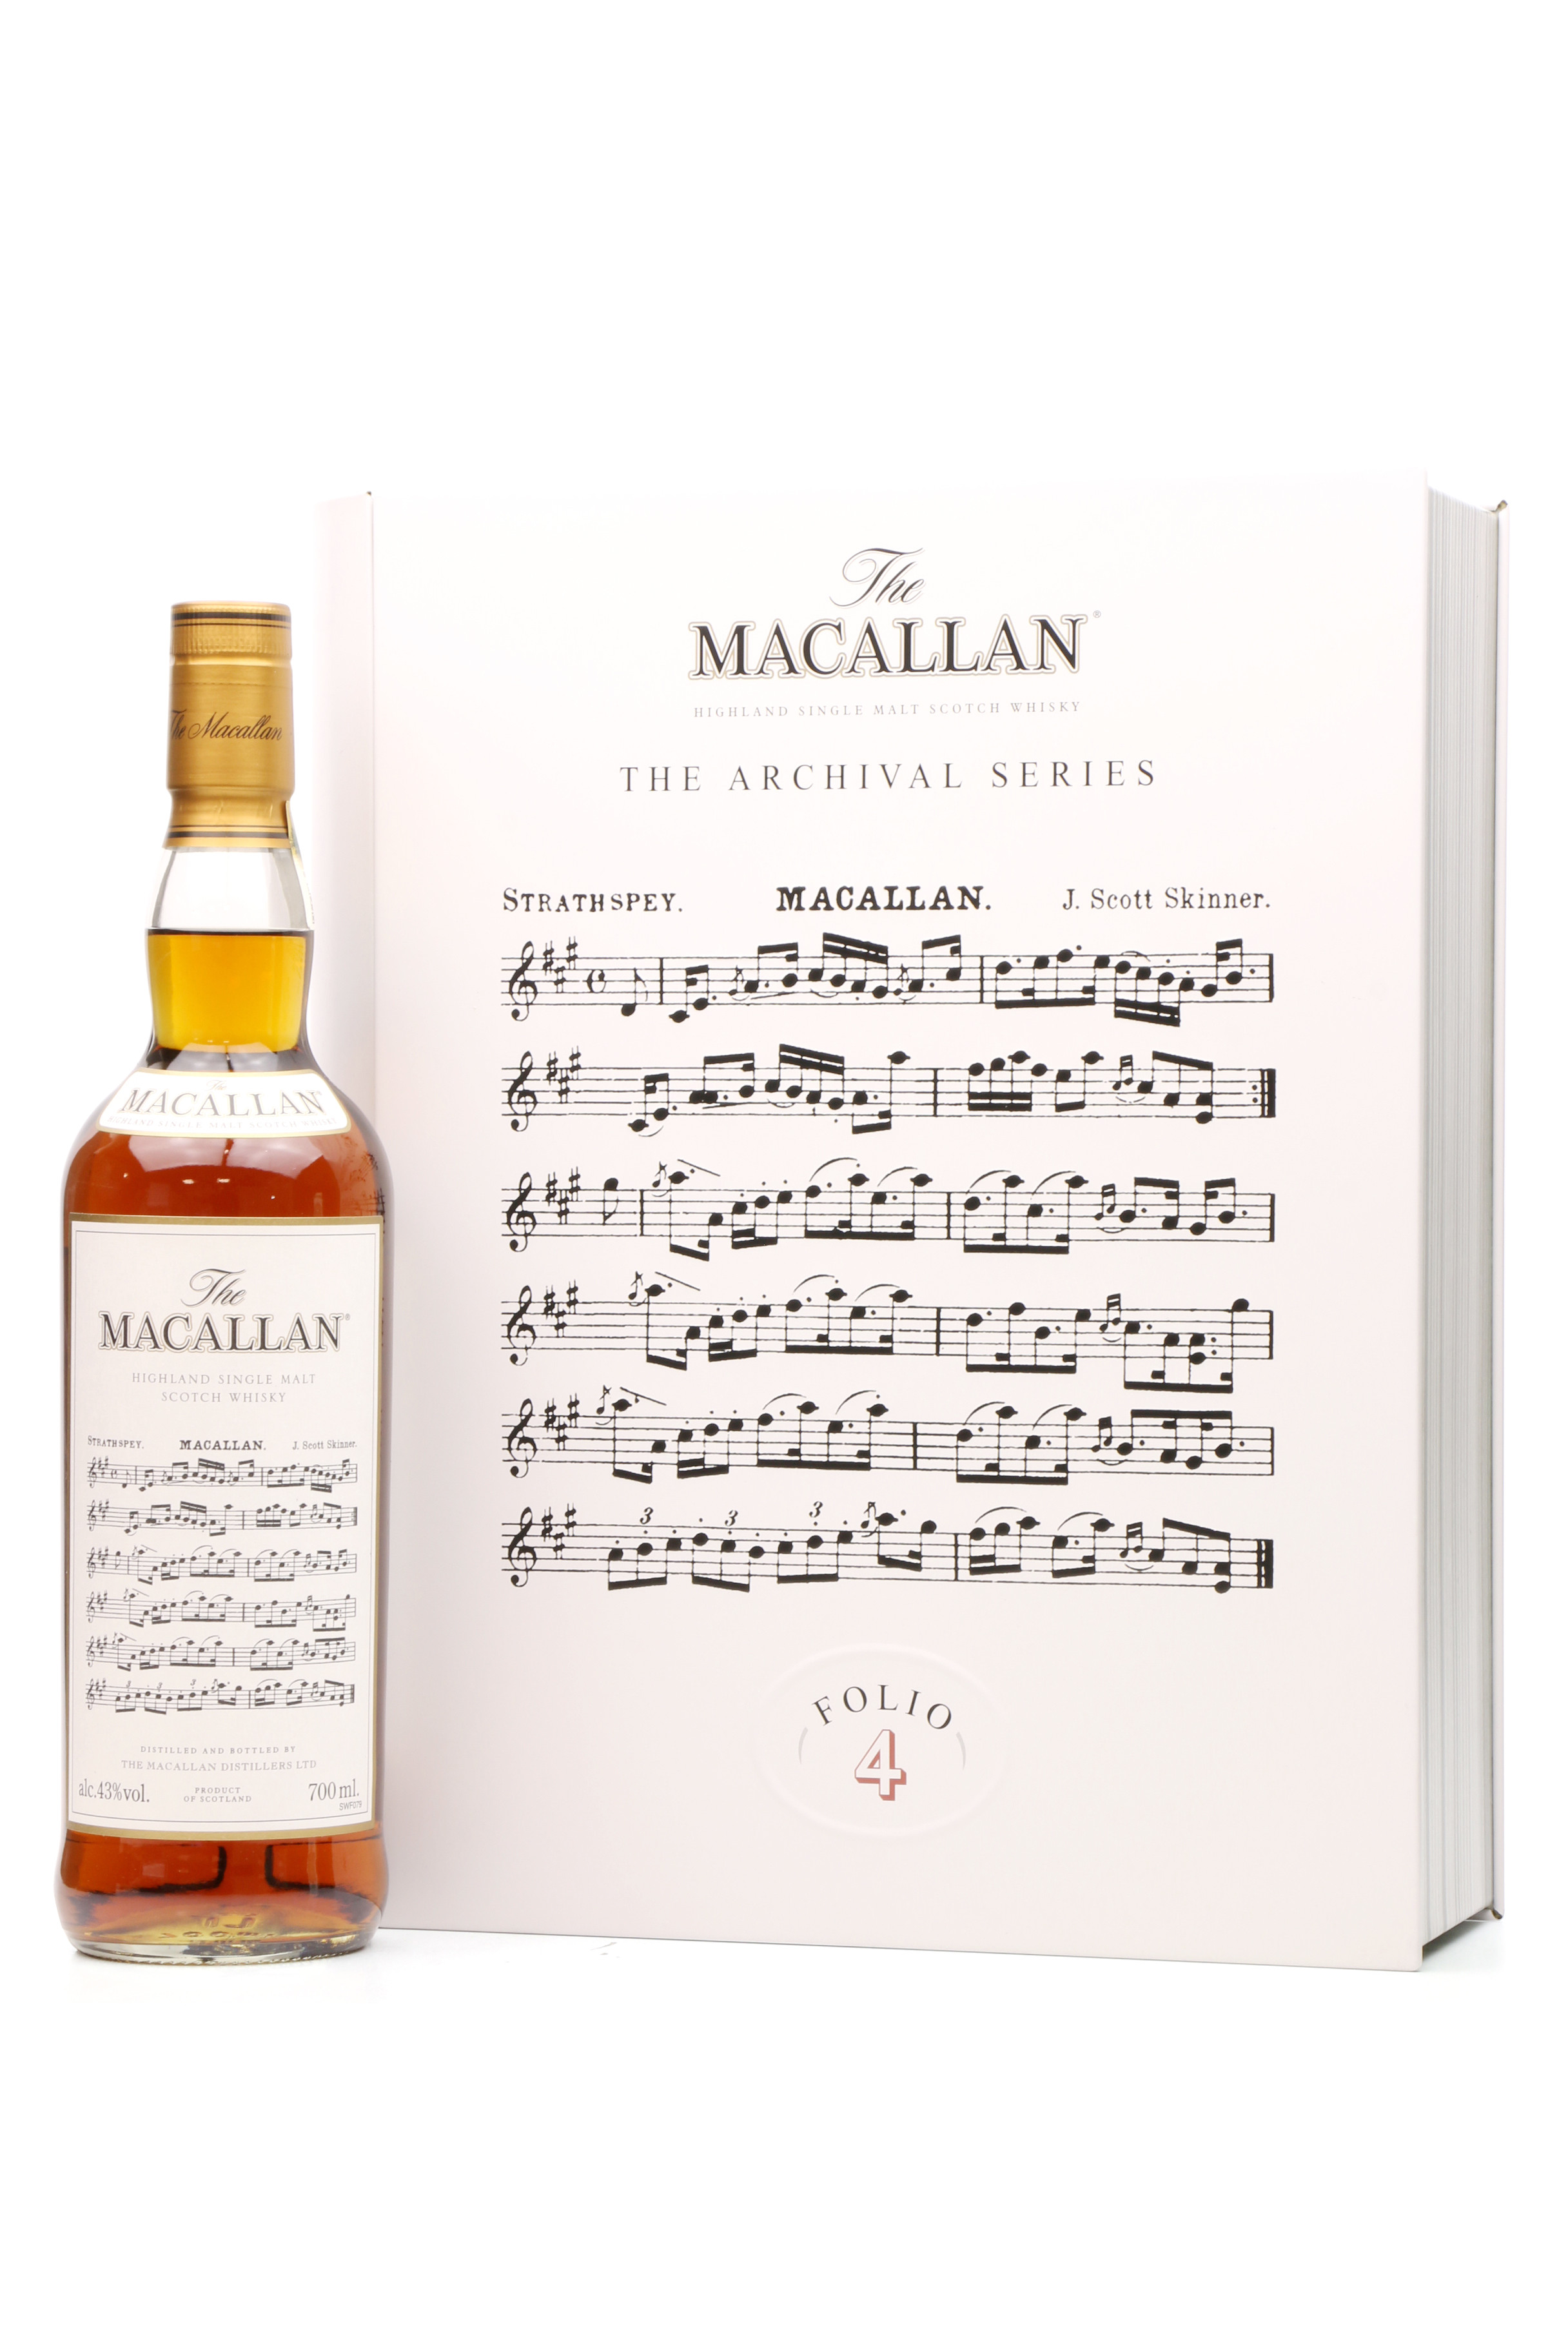 Macallan The Archival Series Folio 4 Just Whisky Auctions